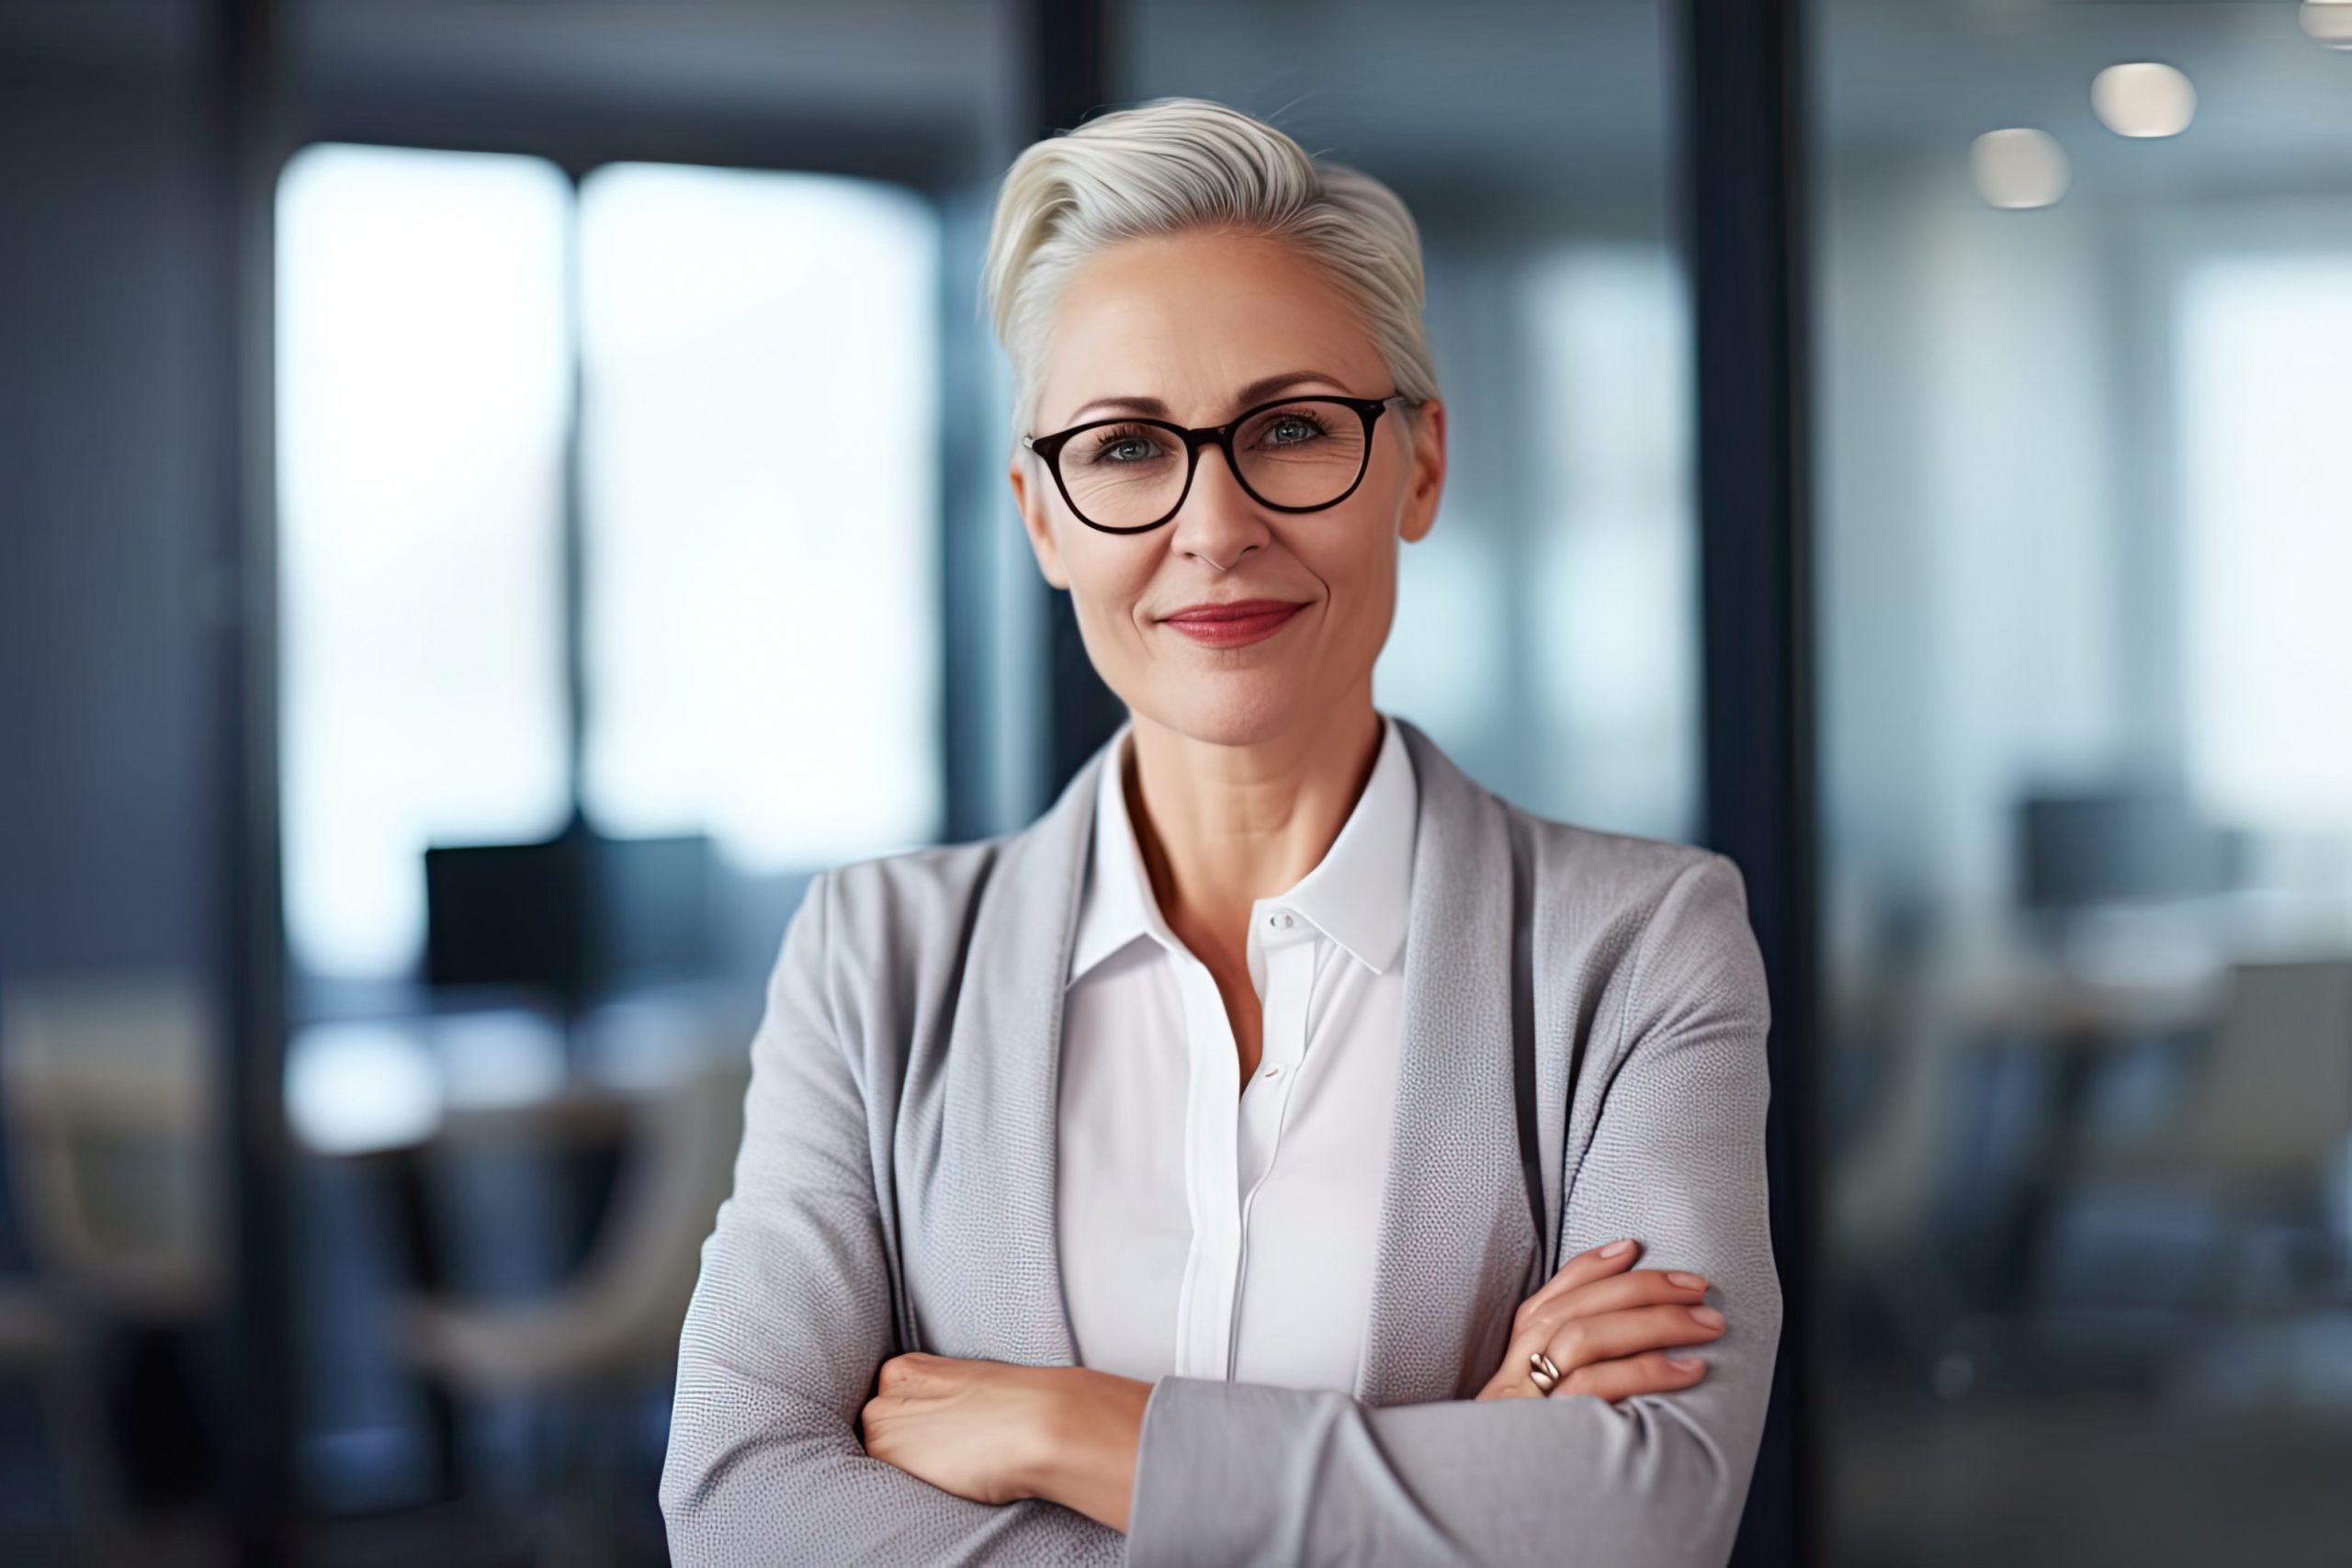 Confident mature businesswoman in modern office, 2 things you should keep in check as a manager